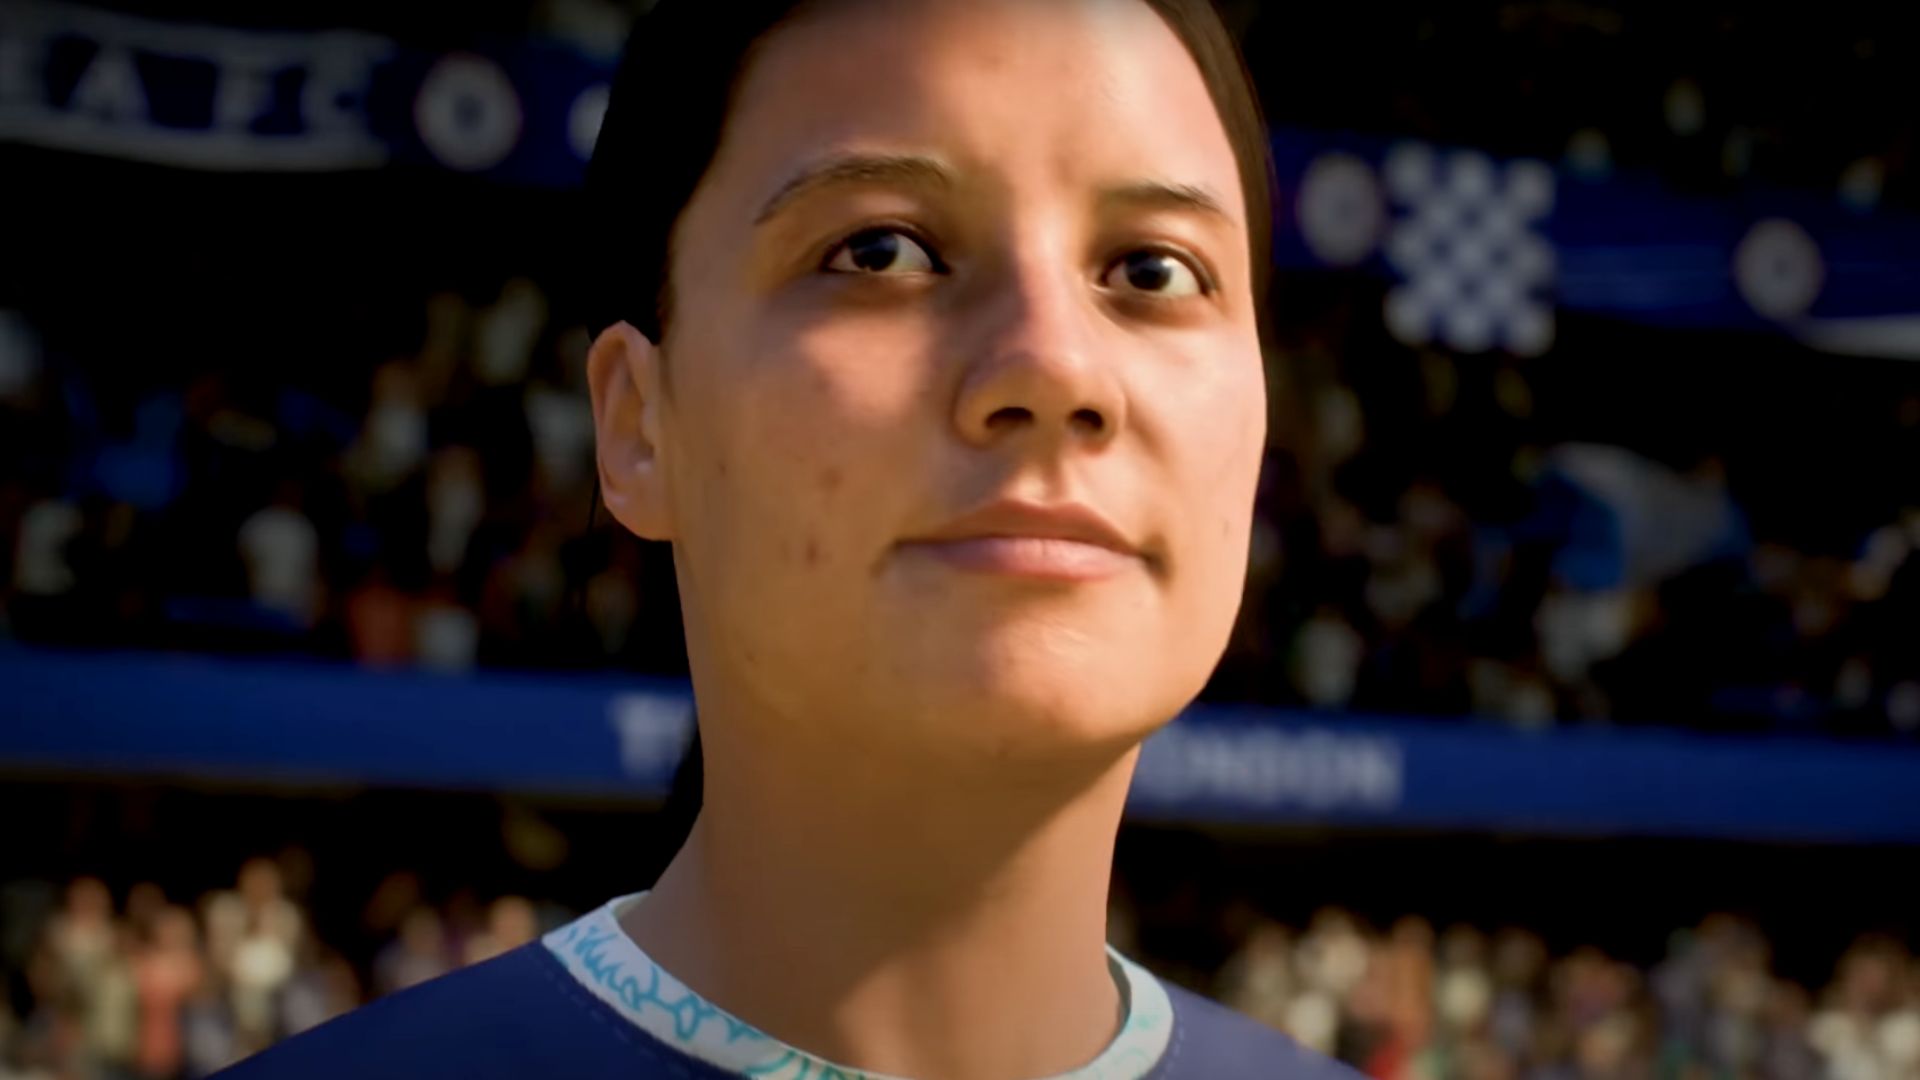 FIFA 23 Reviews, Pros and Cons